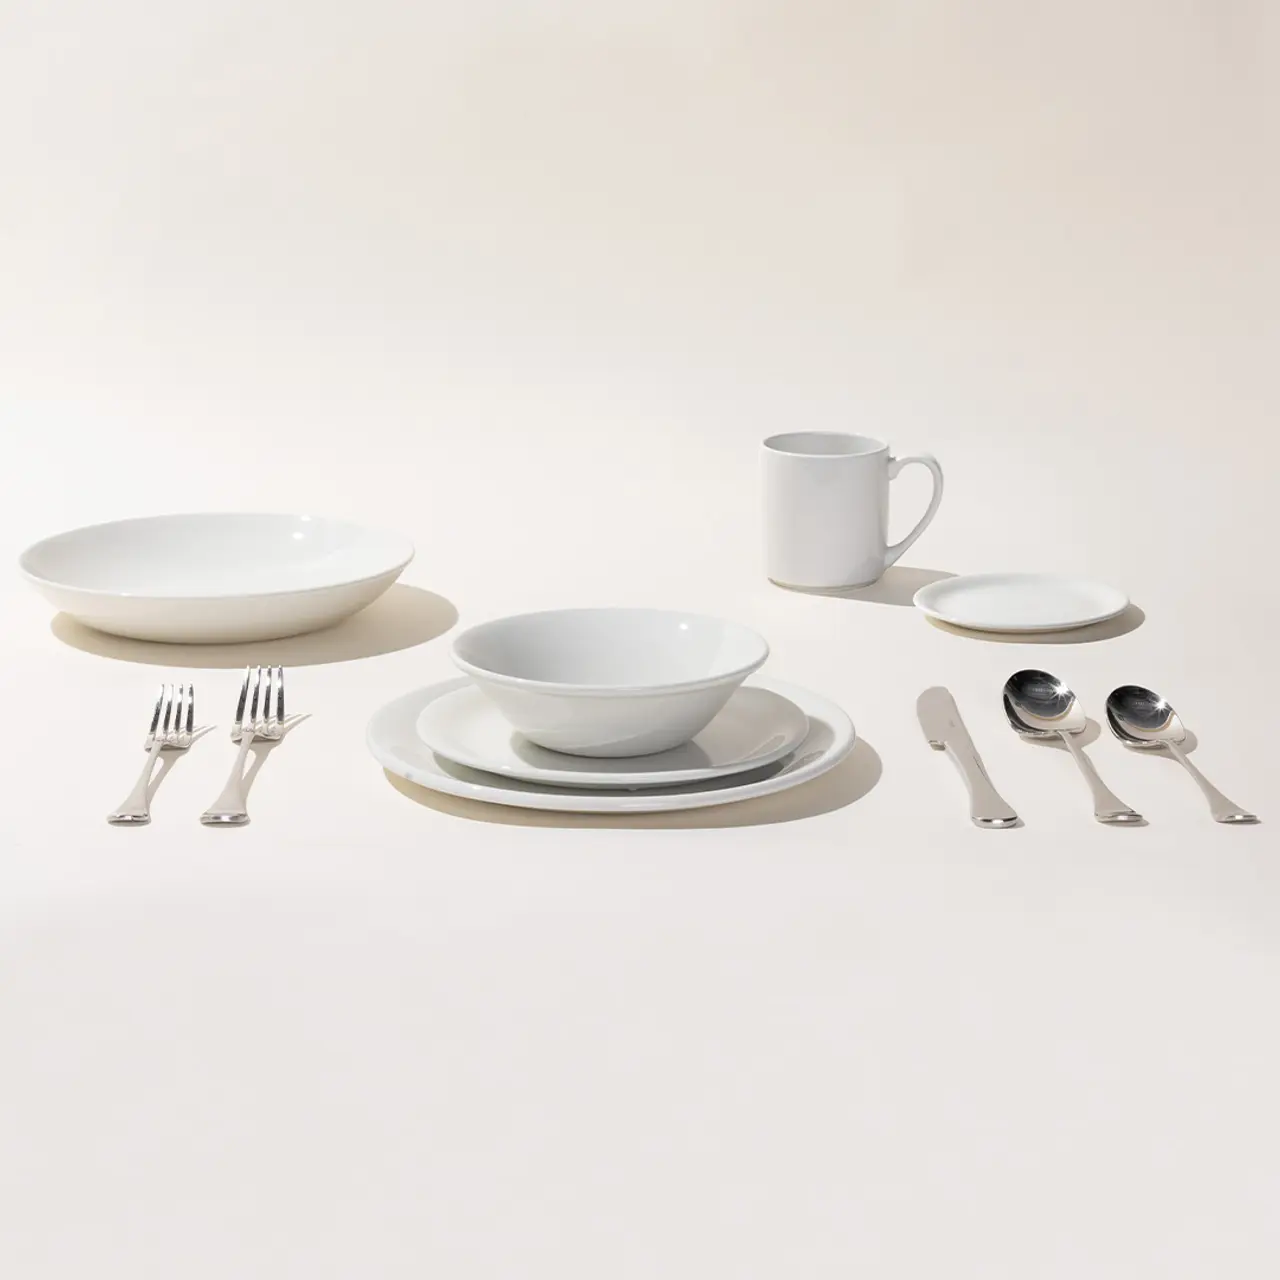 A neatly arranged set of white dinnerware and silver cutlery is displayed against a light background.